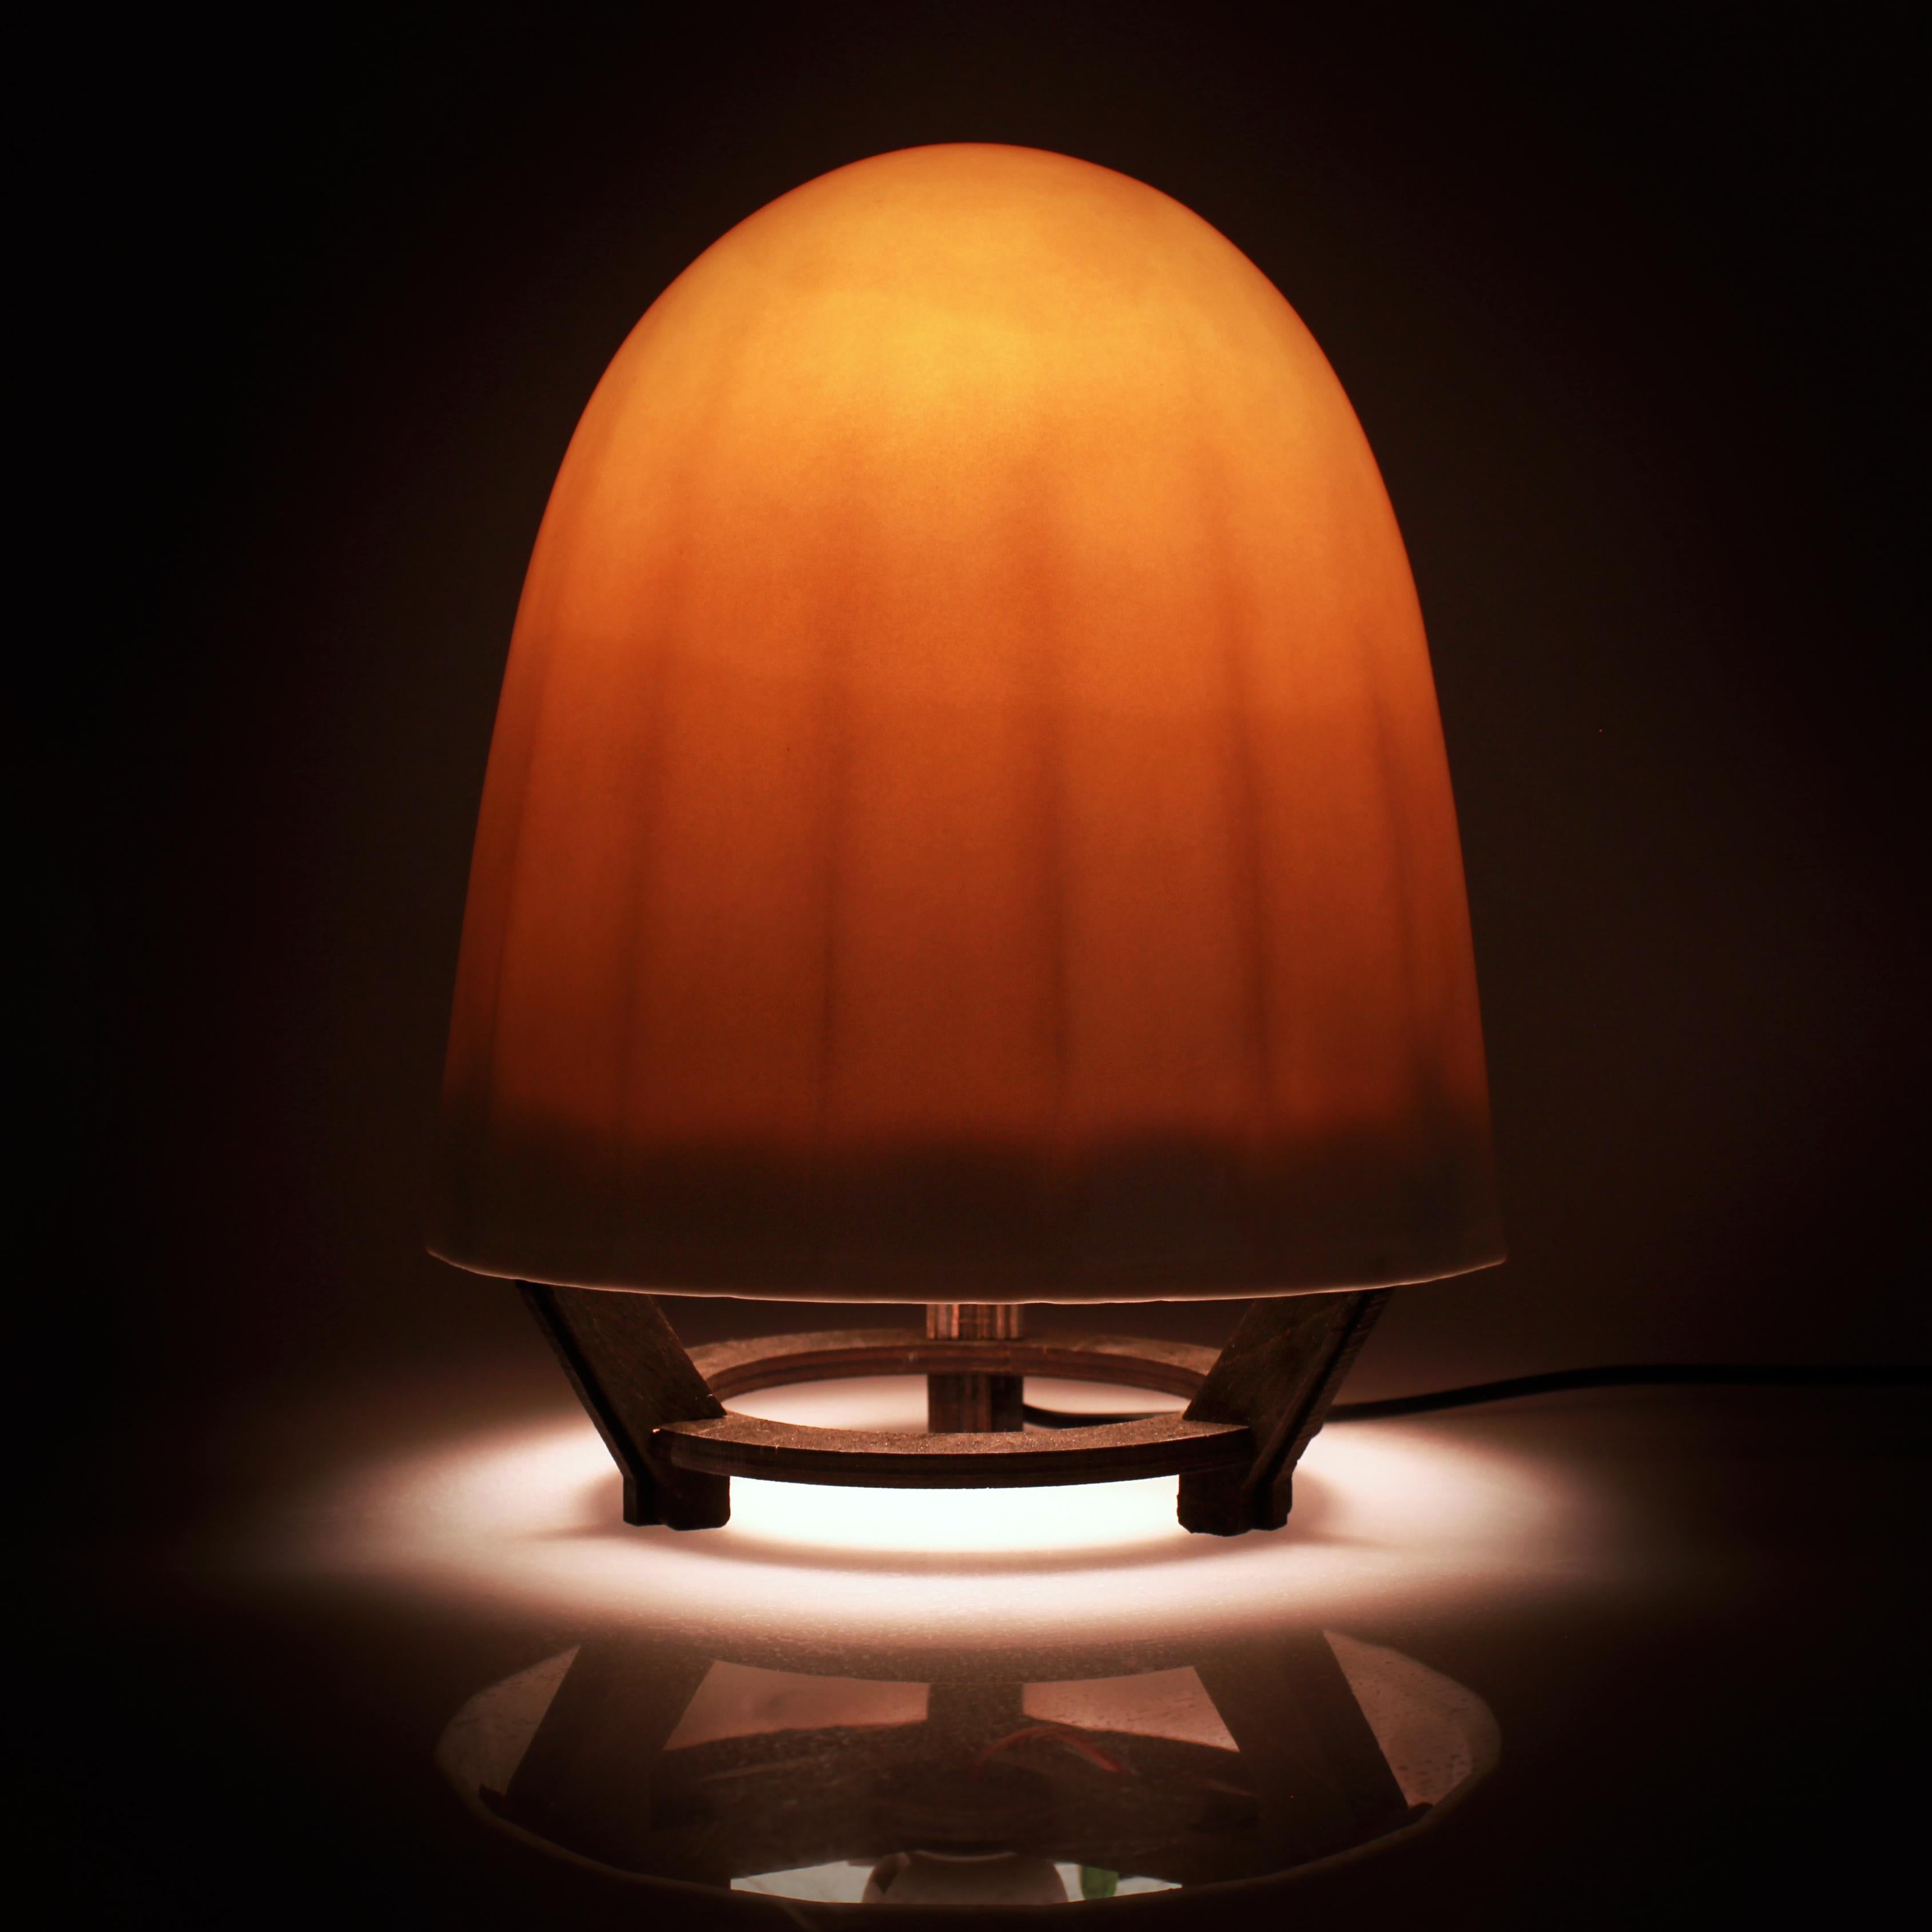 This unique translucent porcelain lamp uses capacitive-sense technology to sense your electromagnetic field and turn on and off when you hover your hand near the lower part of the shade. 

- Perfect ambient glow for bedside table lamp, yoga